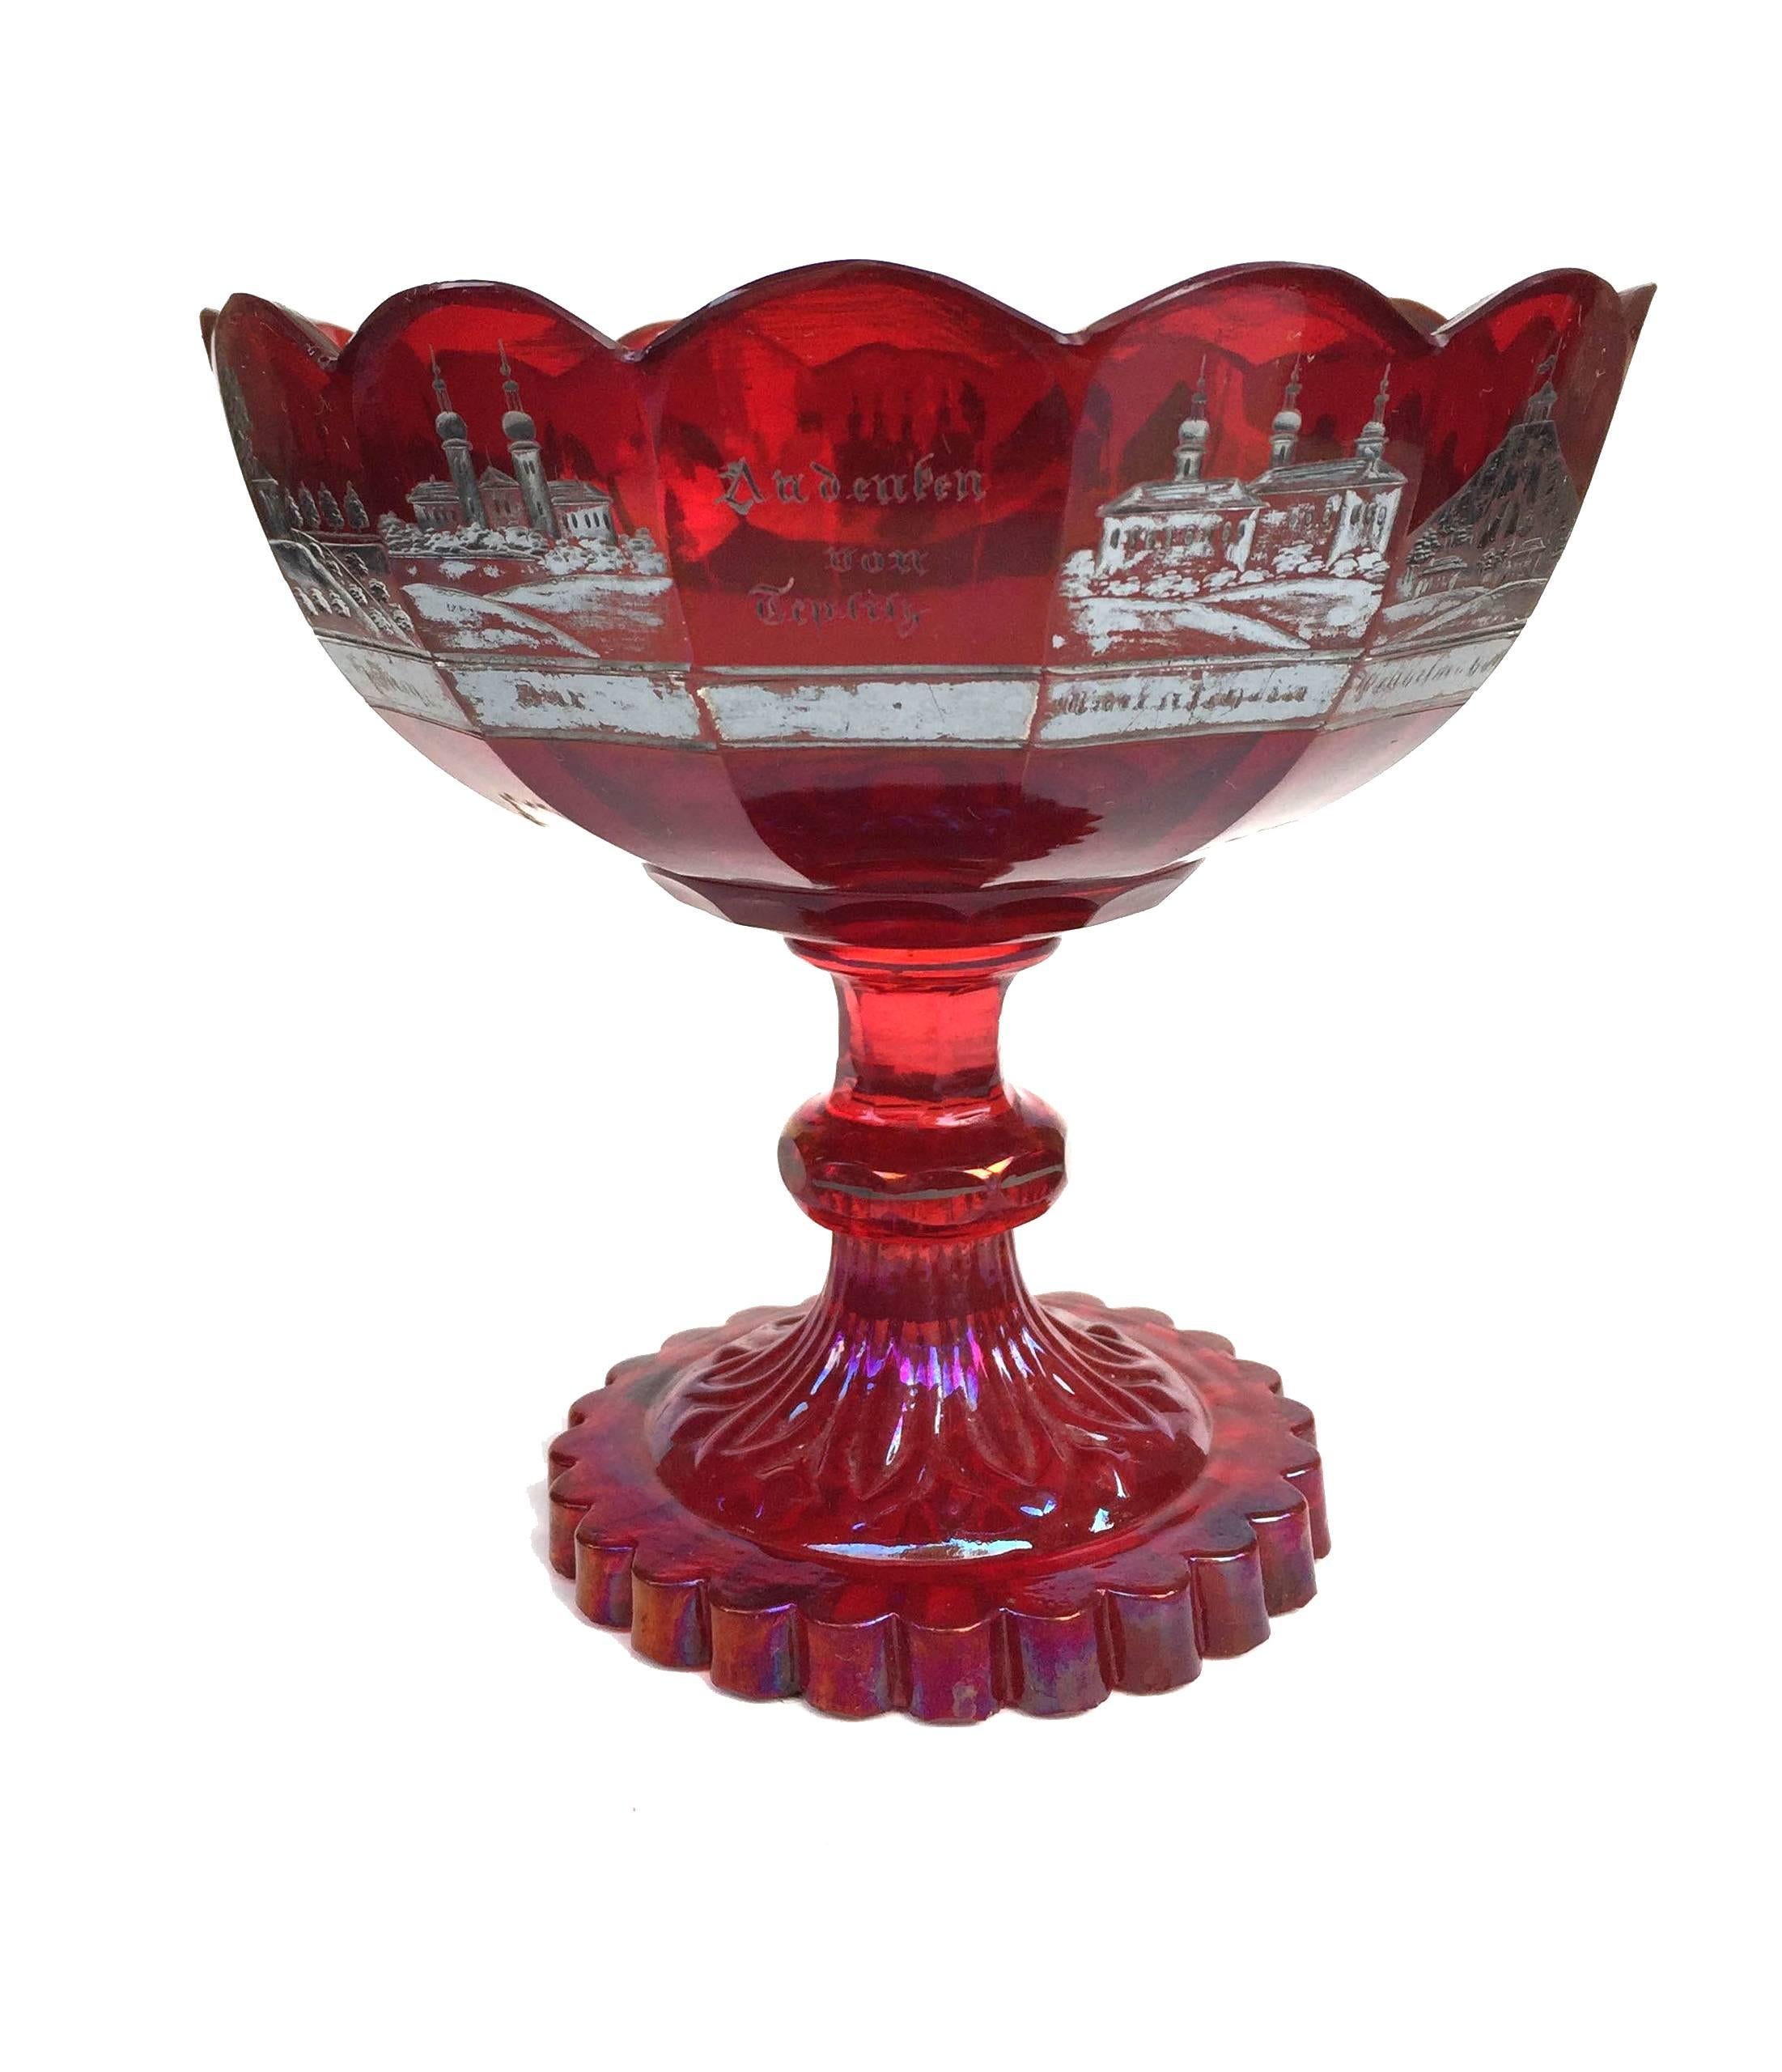 Czech Bohemian glass silver-resist ruby-stained souvenir compote, the bowl of scalloped form, with silver resist scenes of the touristic highlights of Teplitz, featuring individual important buildings in 13 of the 14 panels, the center panel titled